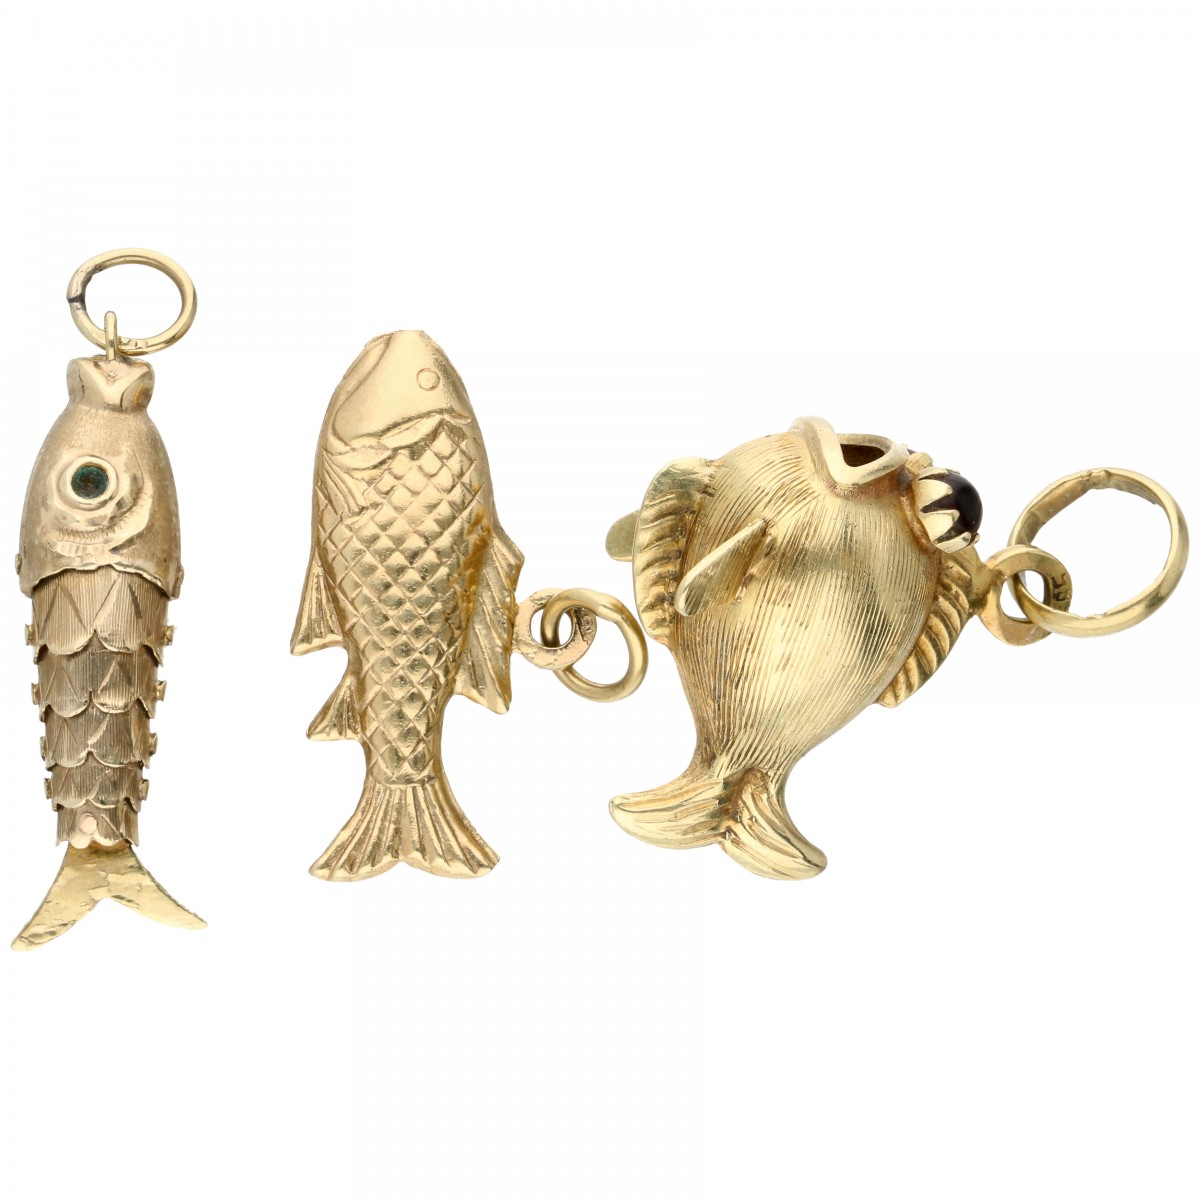 Lot of 3 pendants in the shape of a fish - 14 ct. - Image 2 of 2